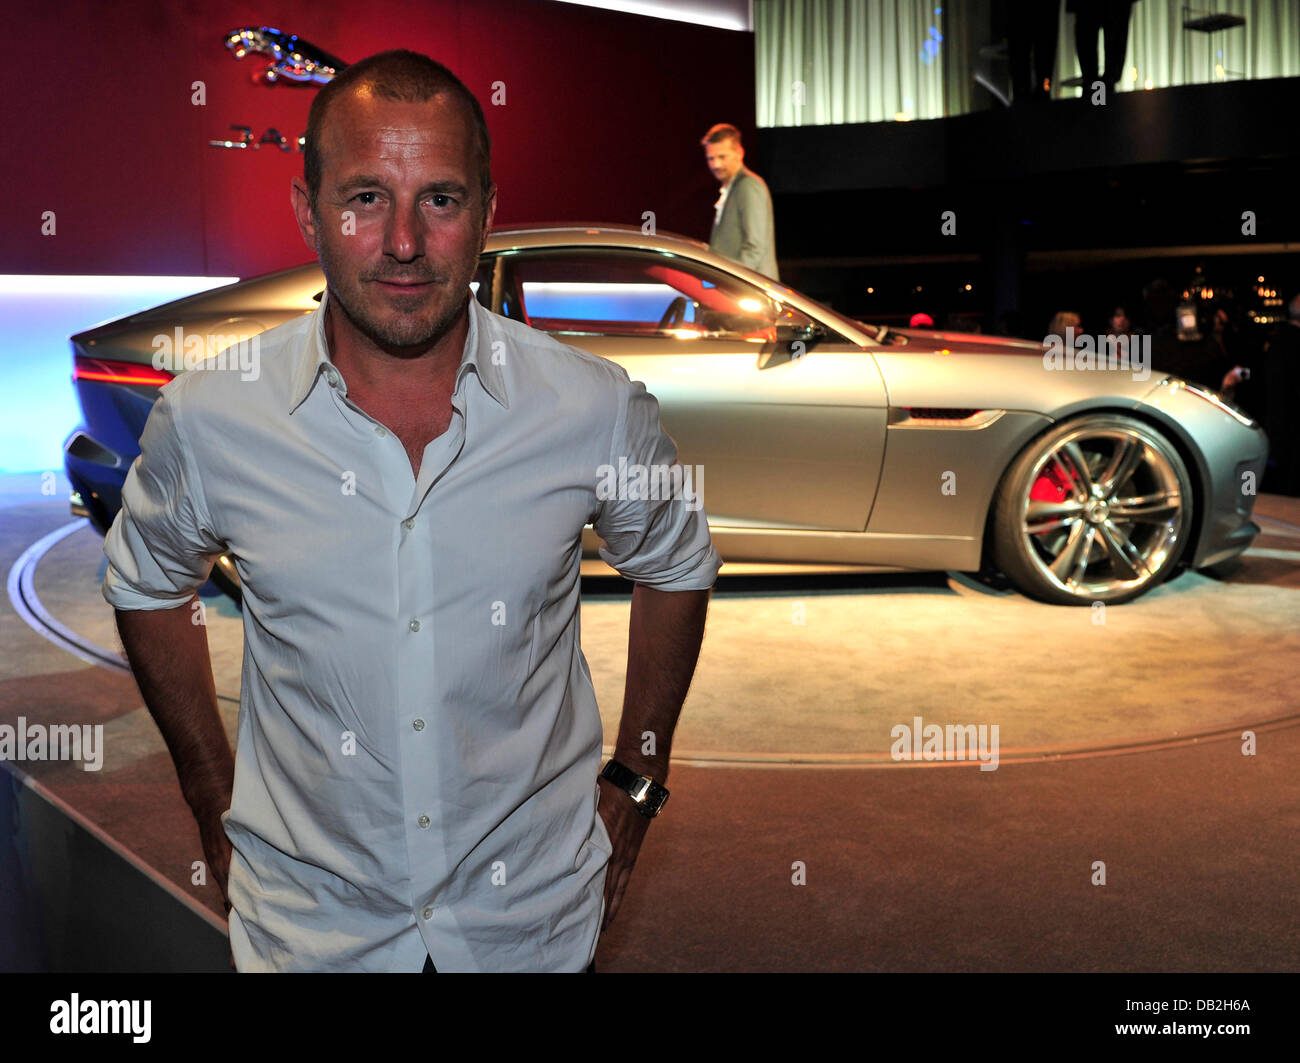 German actor Heino Ferch sits in front of the concept sports car Jaguar C-X16 after its presentation at Palais Thurn und Taxis at the International Motor Show IAA in Frankfurt Main, Germany, 12 September 2011. From 15 to 25 September 2011 exhibitors from all over the world will present new trends of the automotive industry, headed by electronic mobility and hybrid vehicles. Photo:  Stock Photo